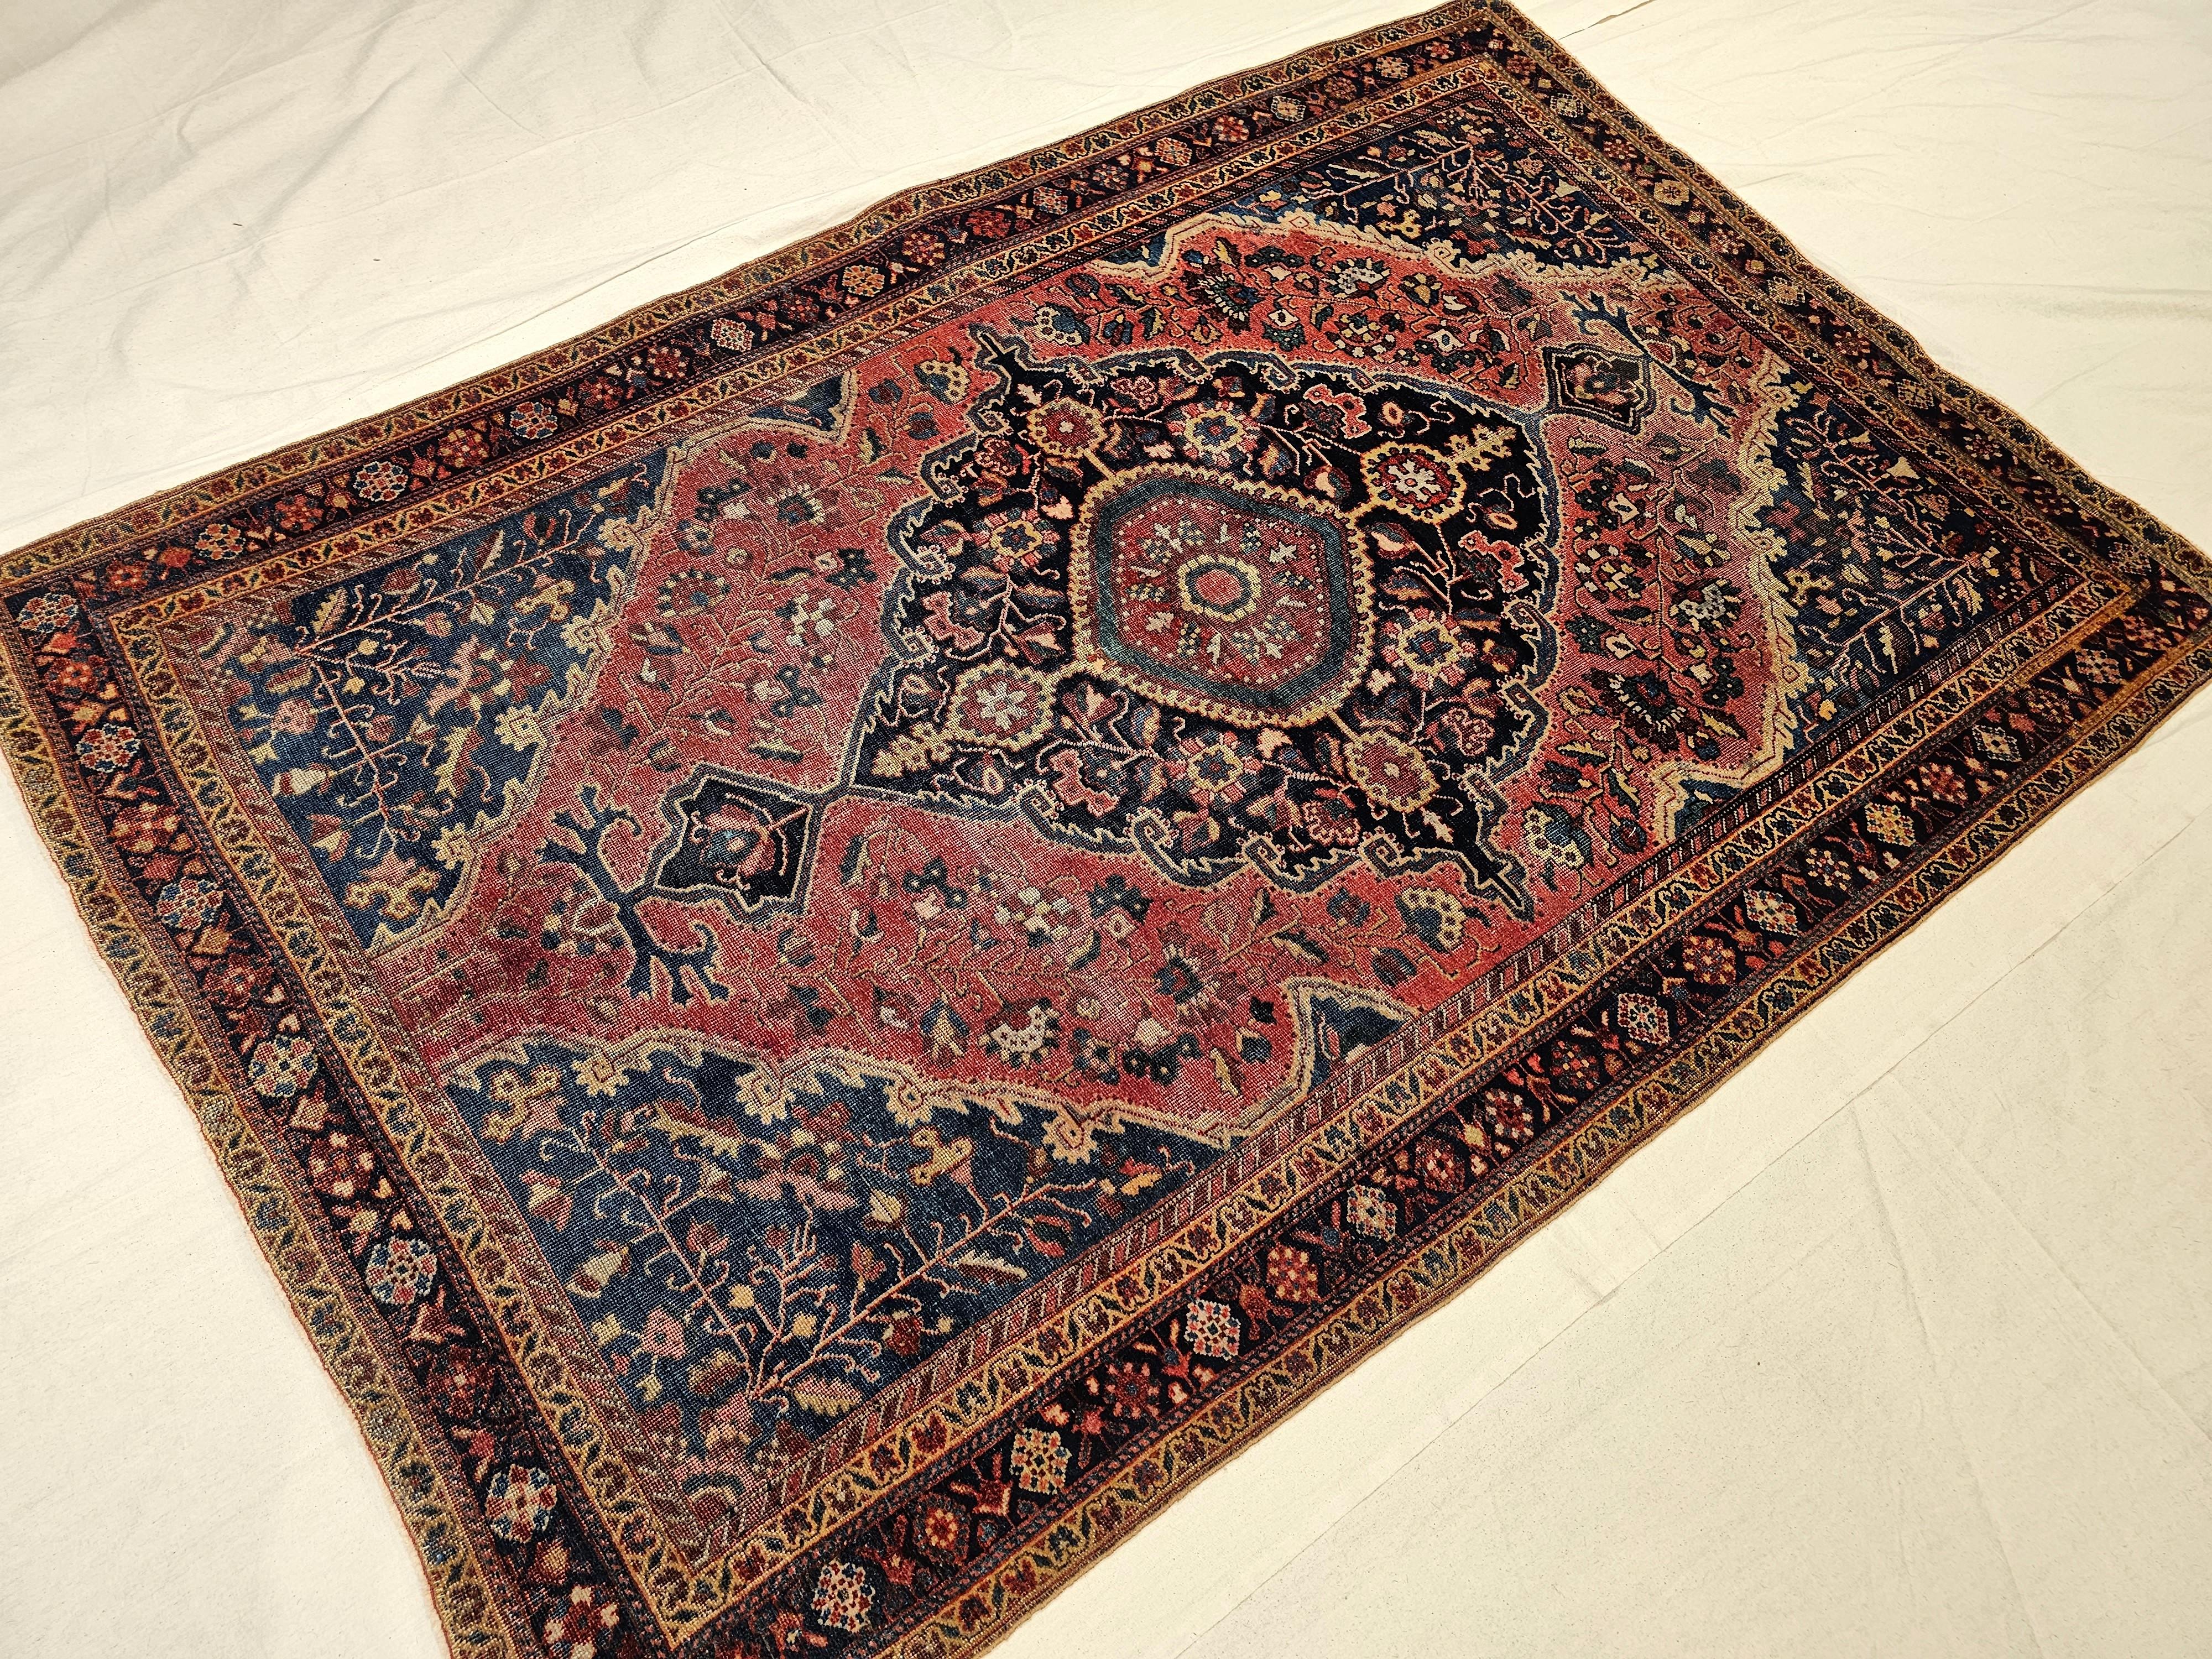 19th Century Persian Farahan Sarouk Area Rug in Rust Red, French Blue, Navy Blue For Sale 2